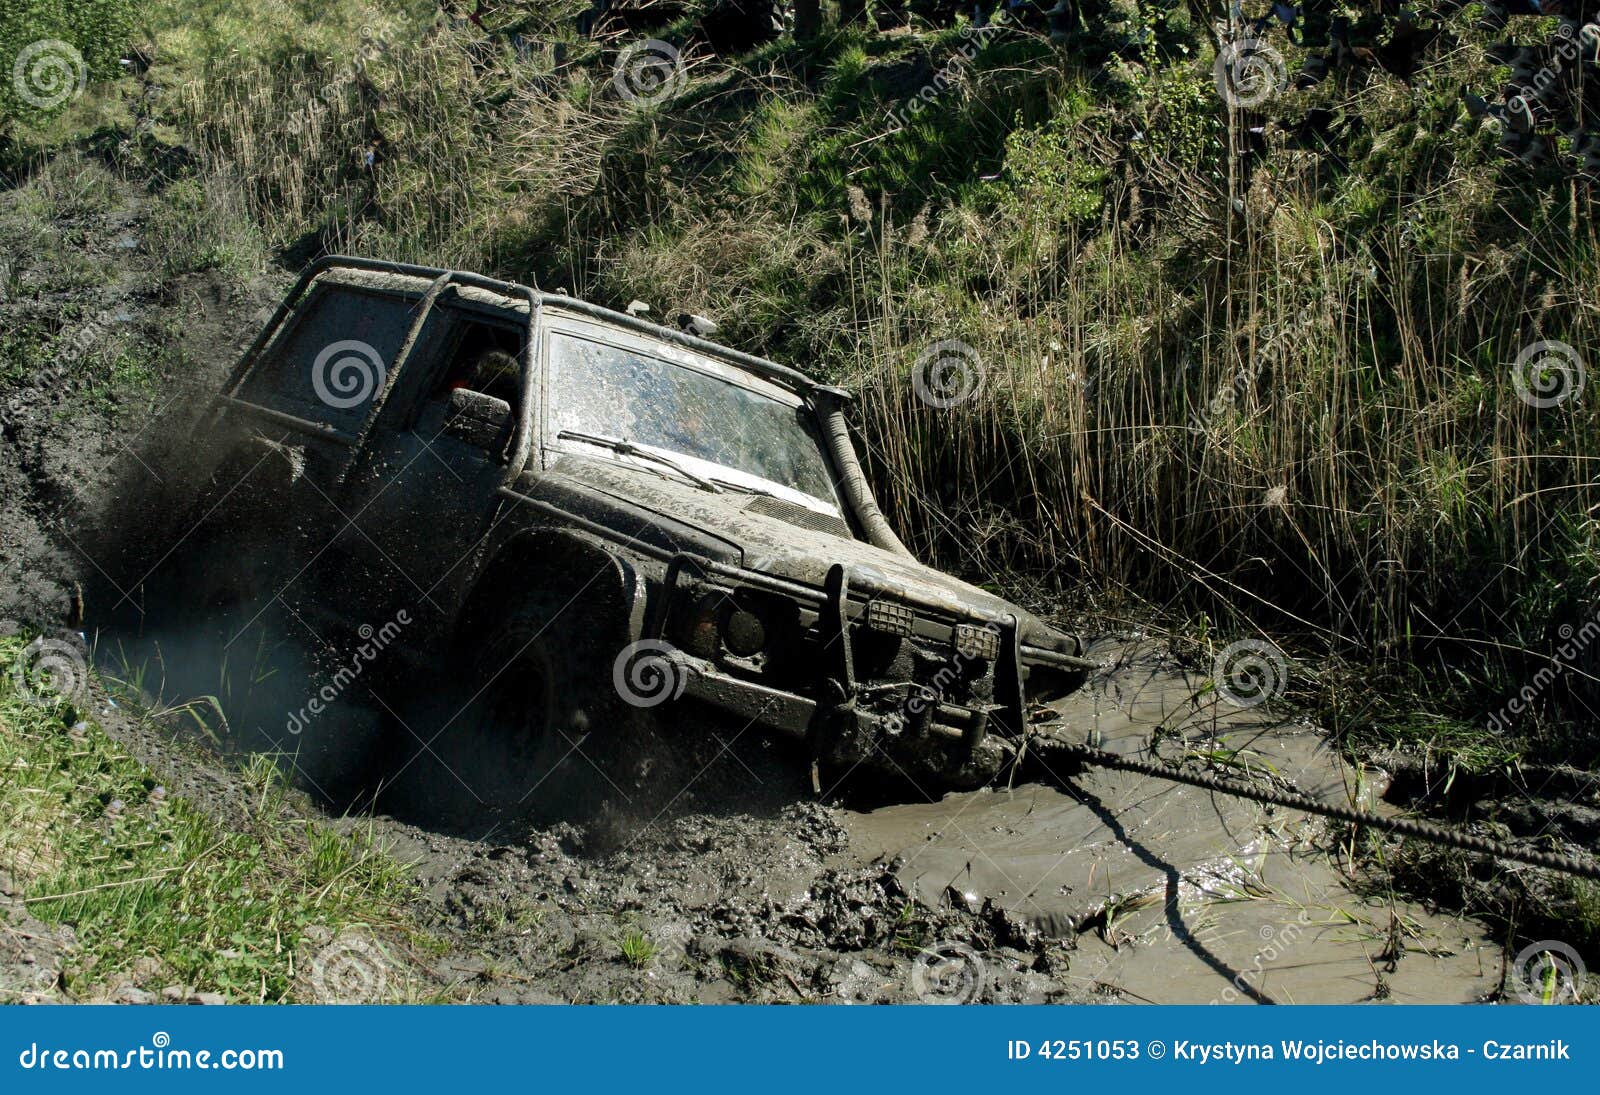 Extreme Off-road Stock Photos - Image: 4251053